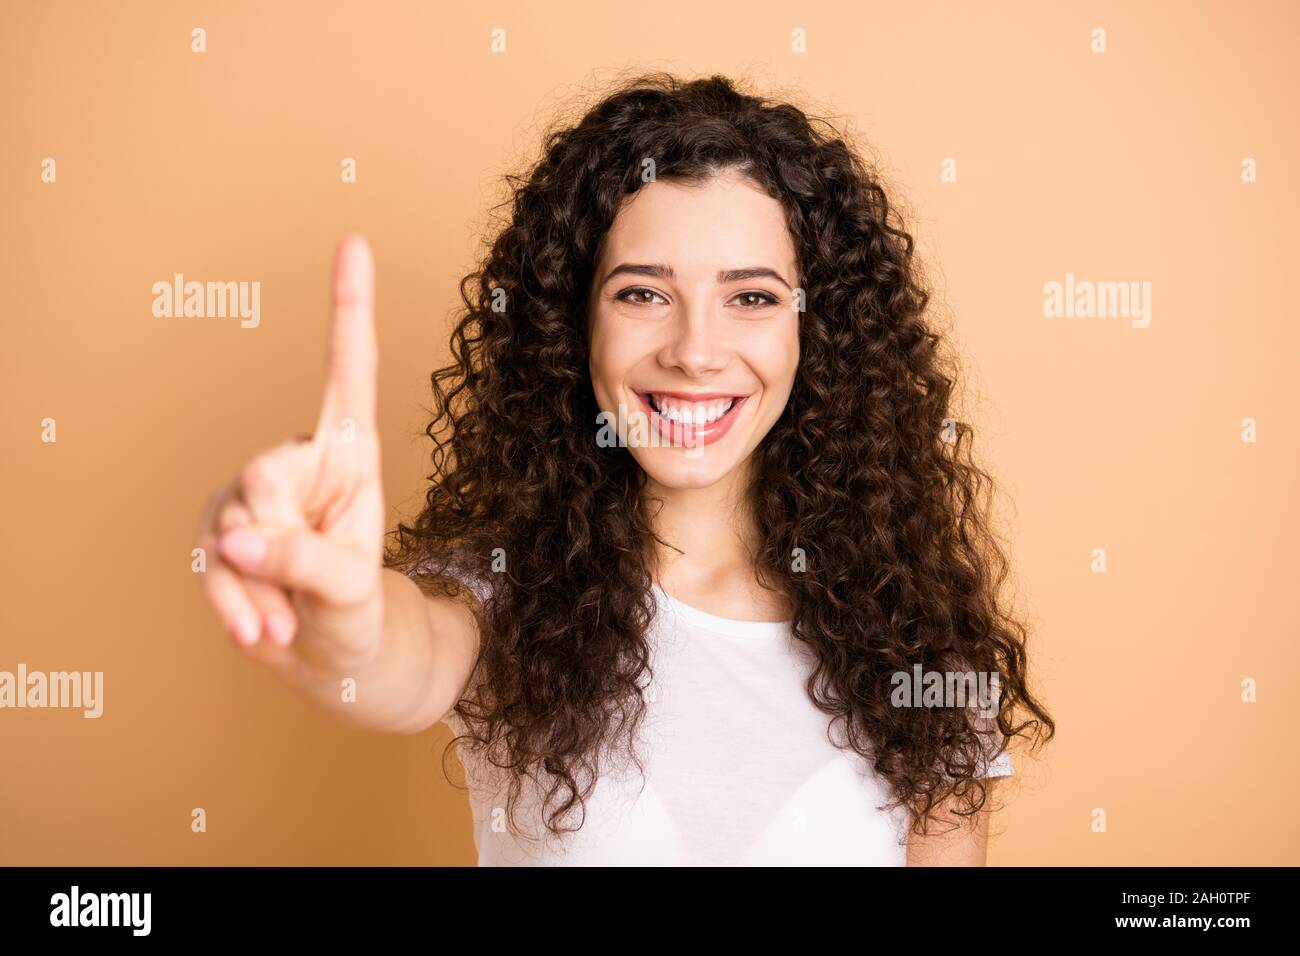 Closeup Photo Of Amazing Lady Raising Hand Showing One Index Finger Starting Countdown Wear